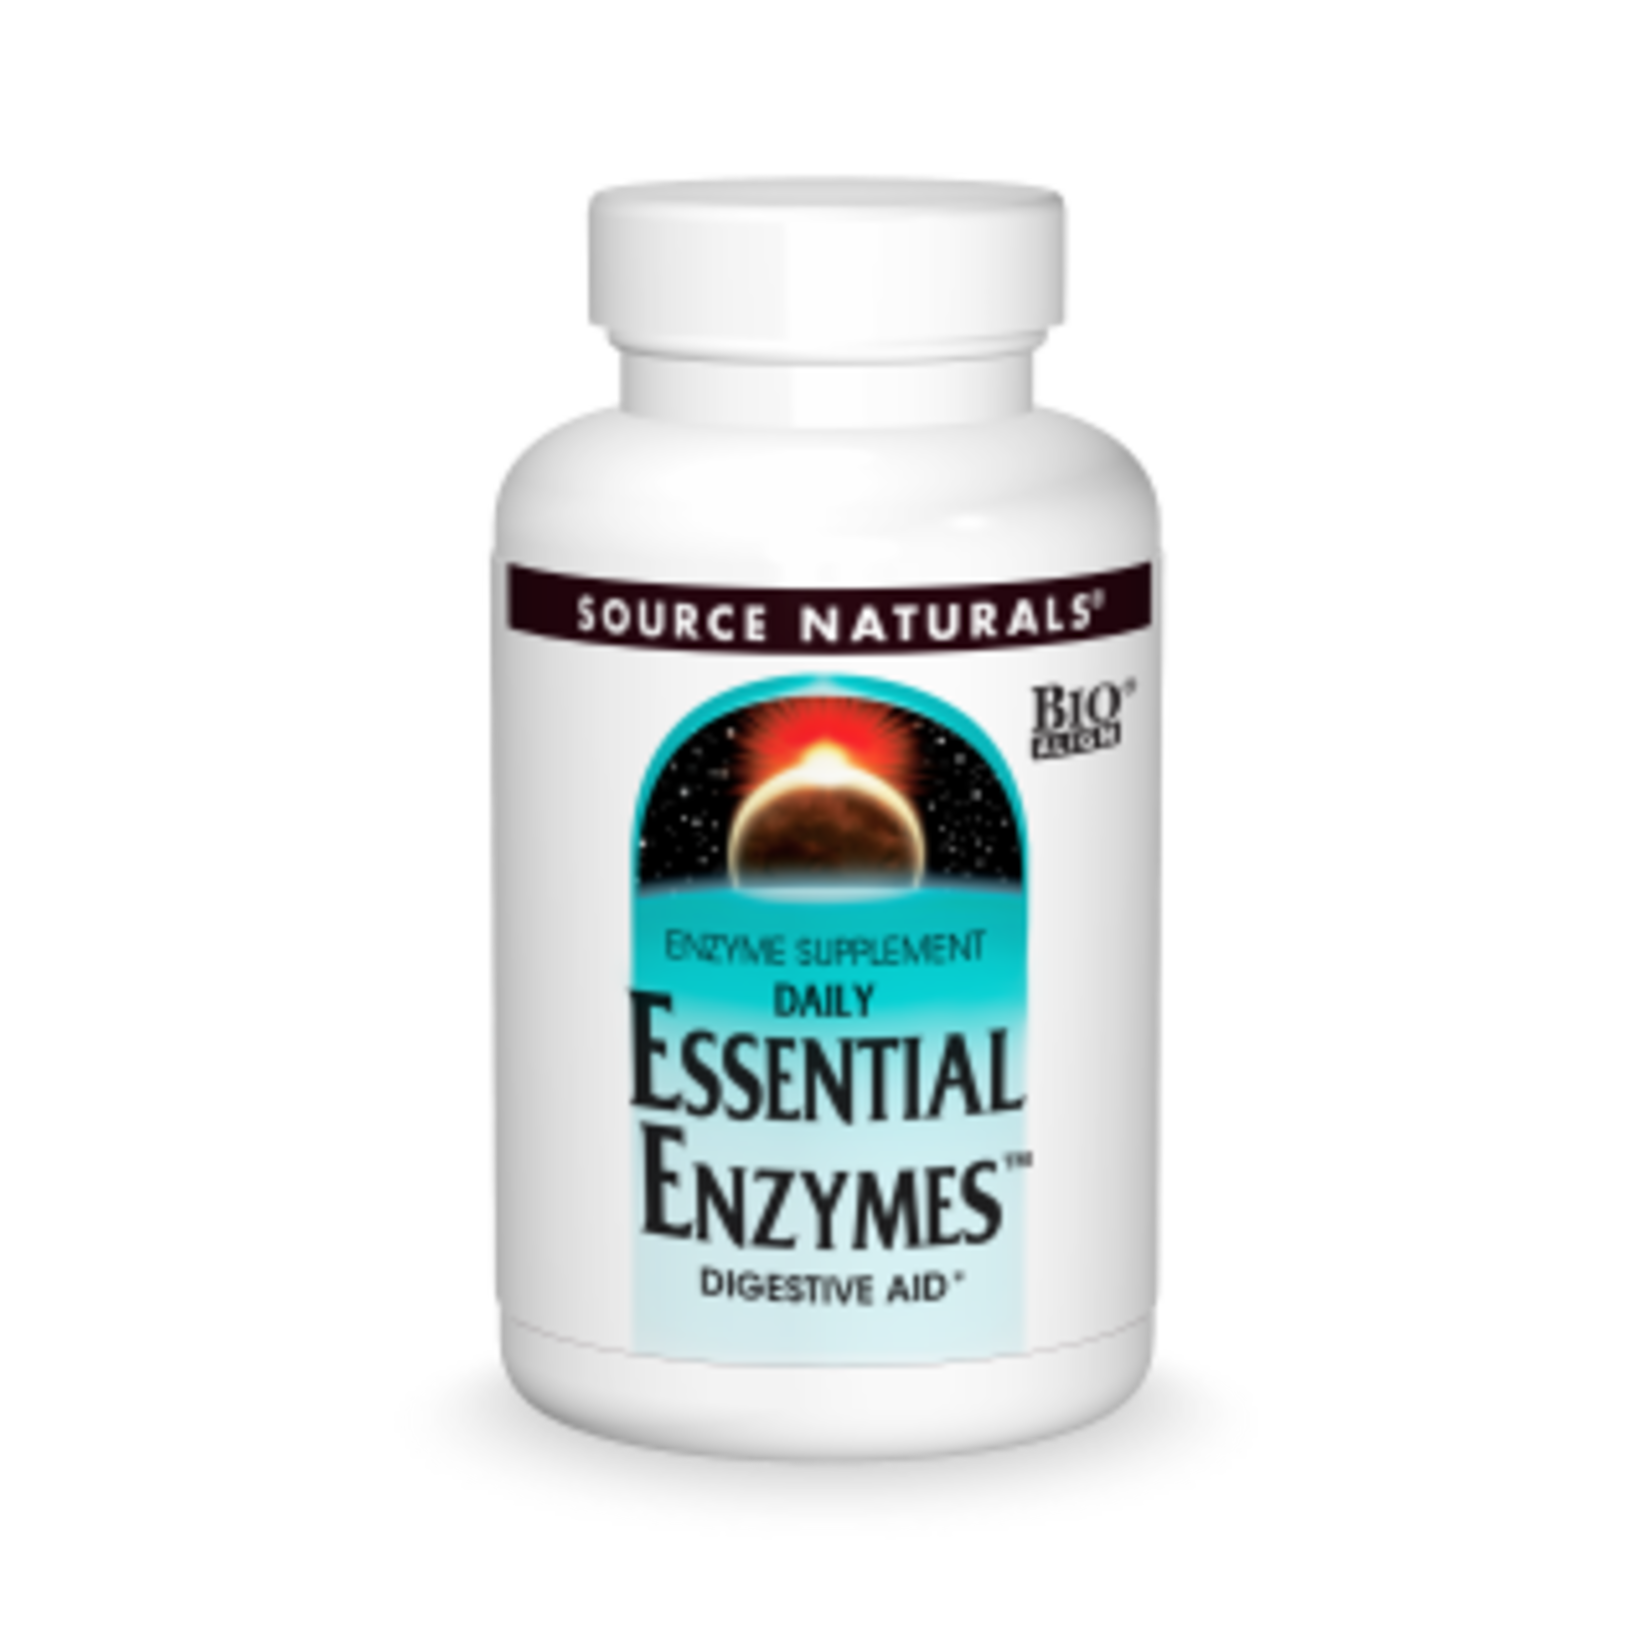 Source Naturals Source Naturals - Essential Enzymes - 60 Capsules